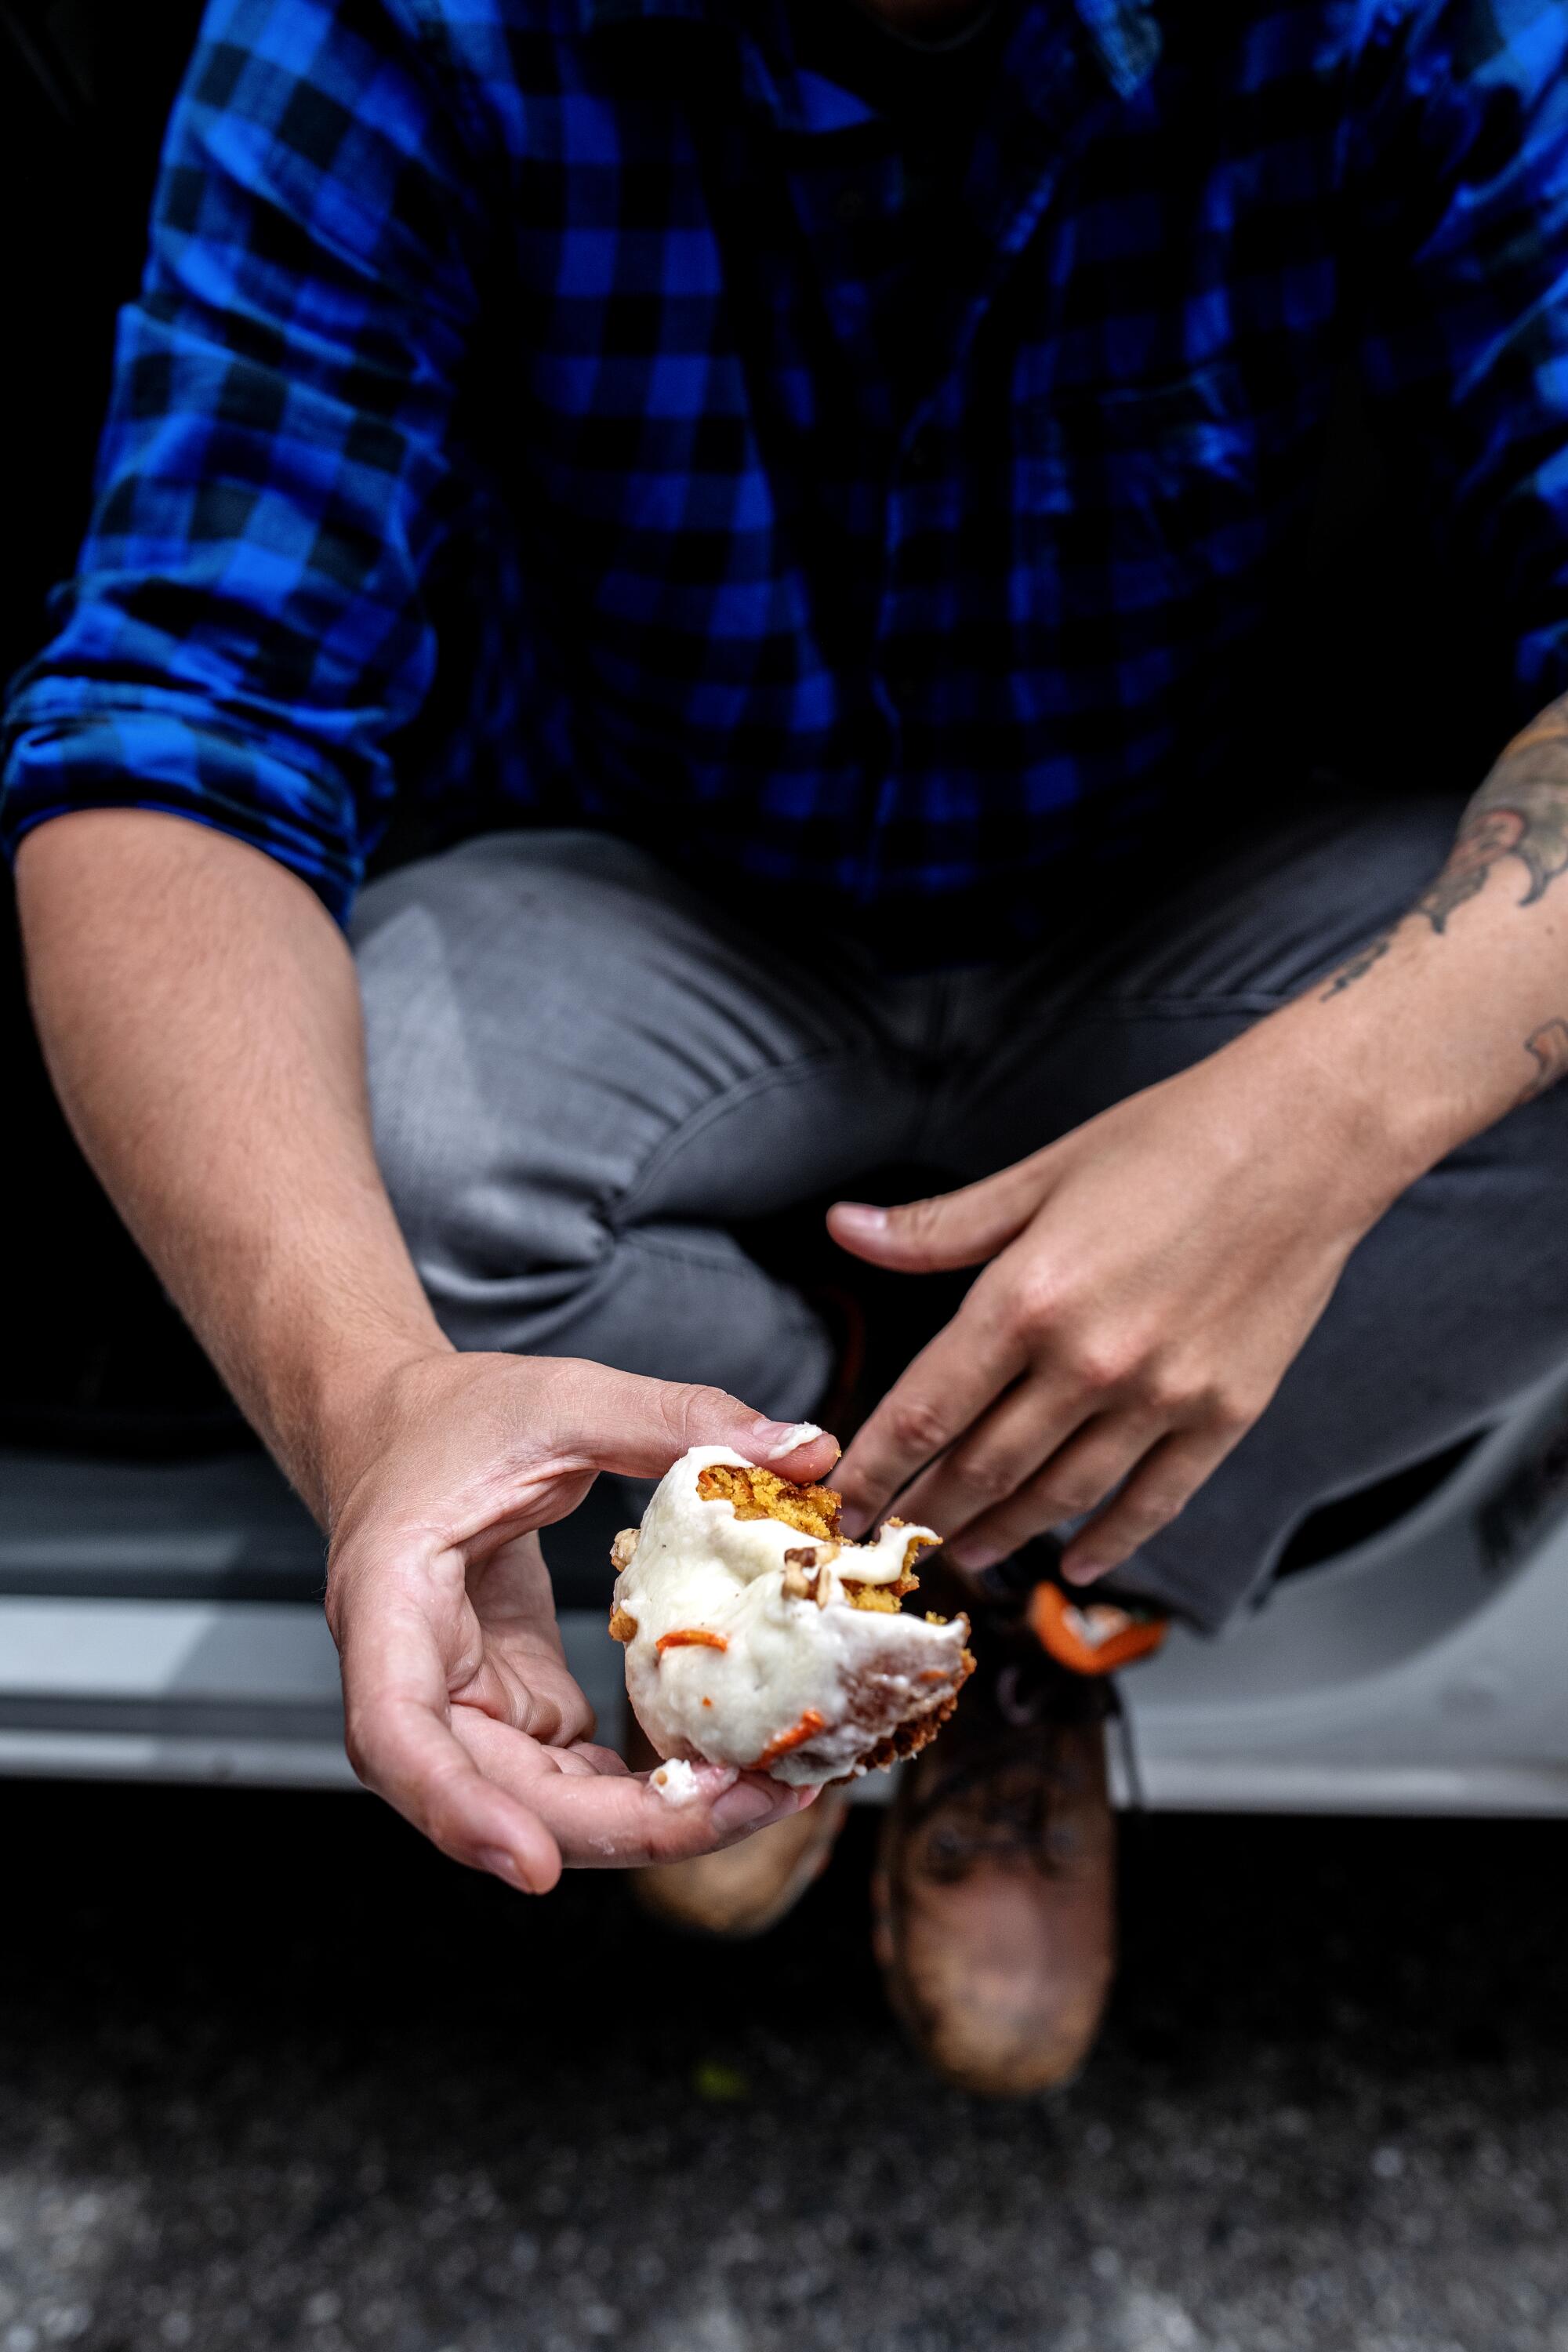 Detail of Danny Palumbo's hand holding a donut as he sits in the drivers' seat of his car, facing outside.